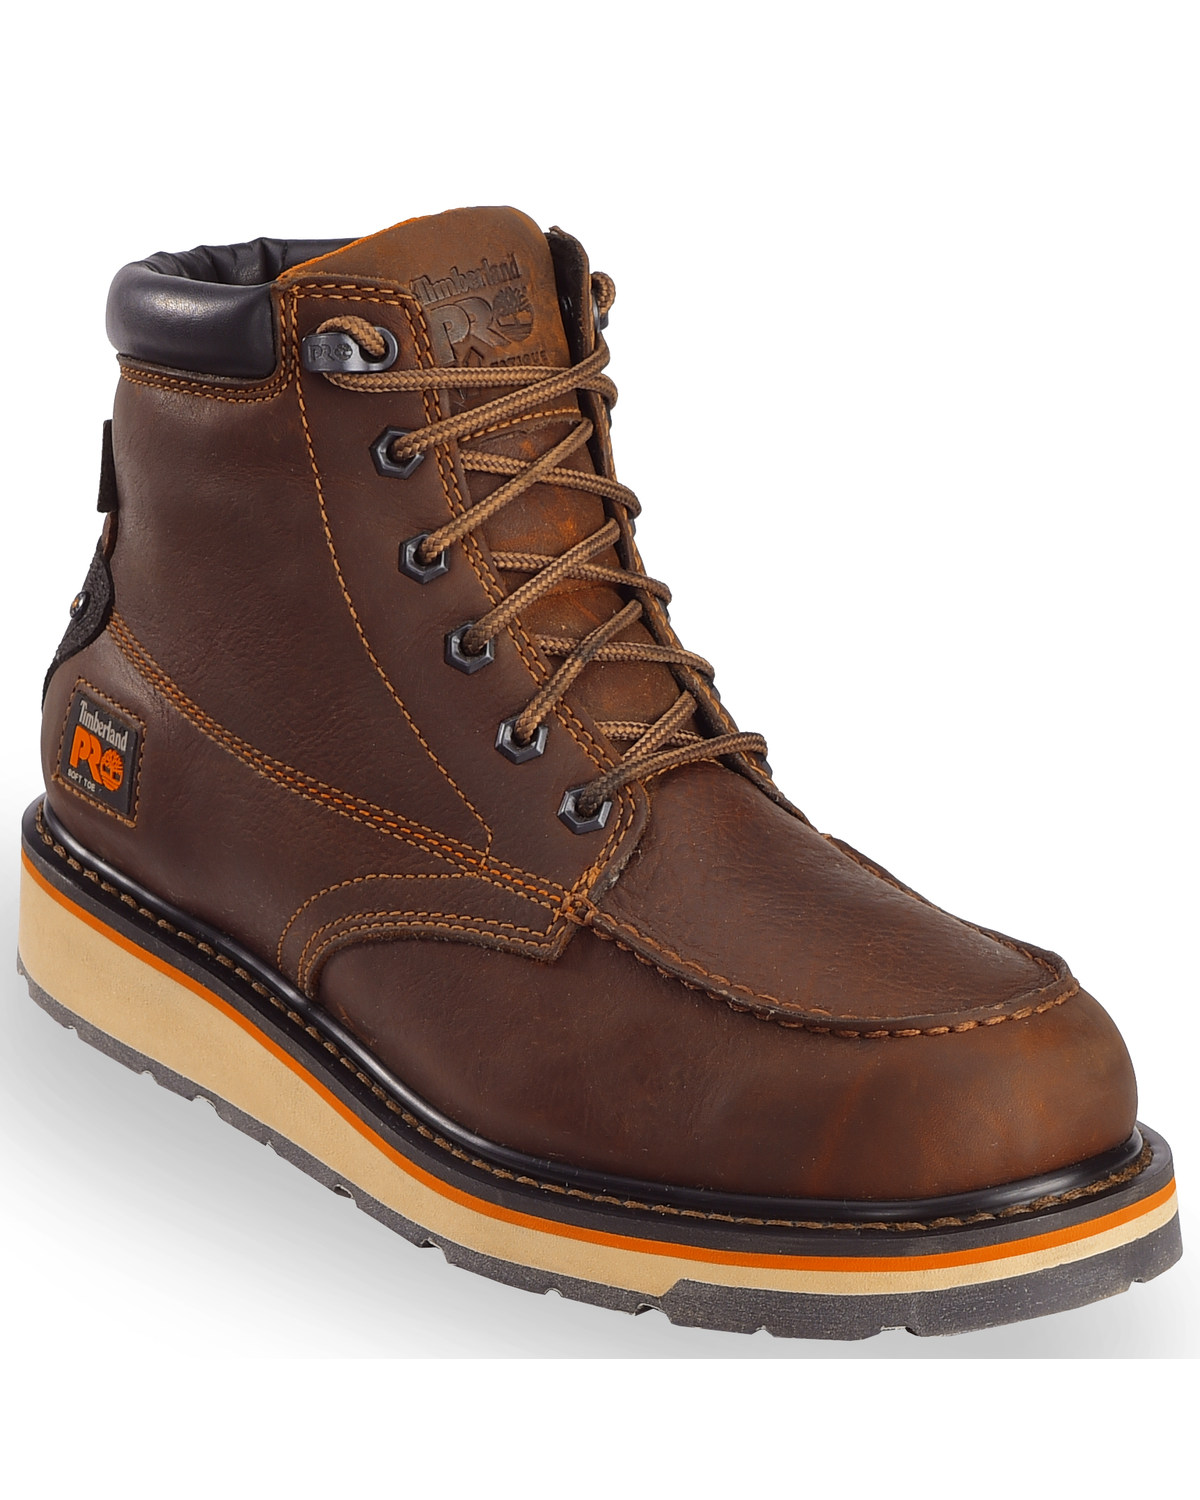 timberland pro gridworks work boots